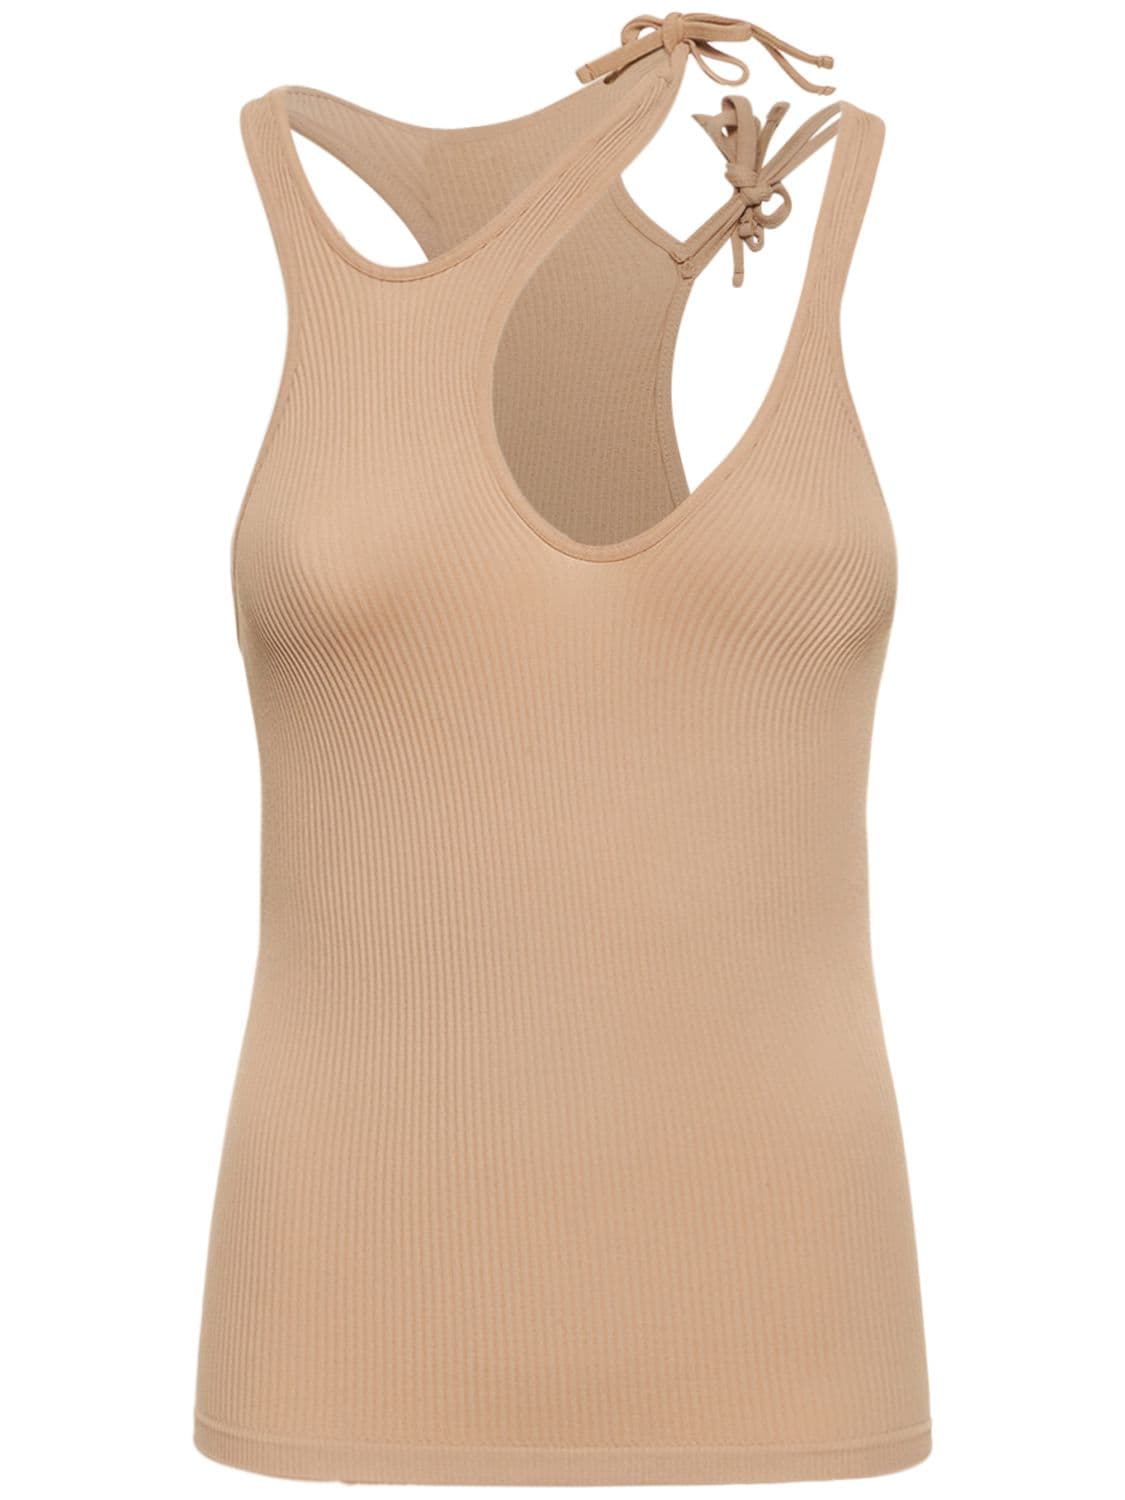 Image of Ribbed Jersey Top W/ Double Straps